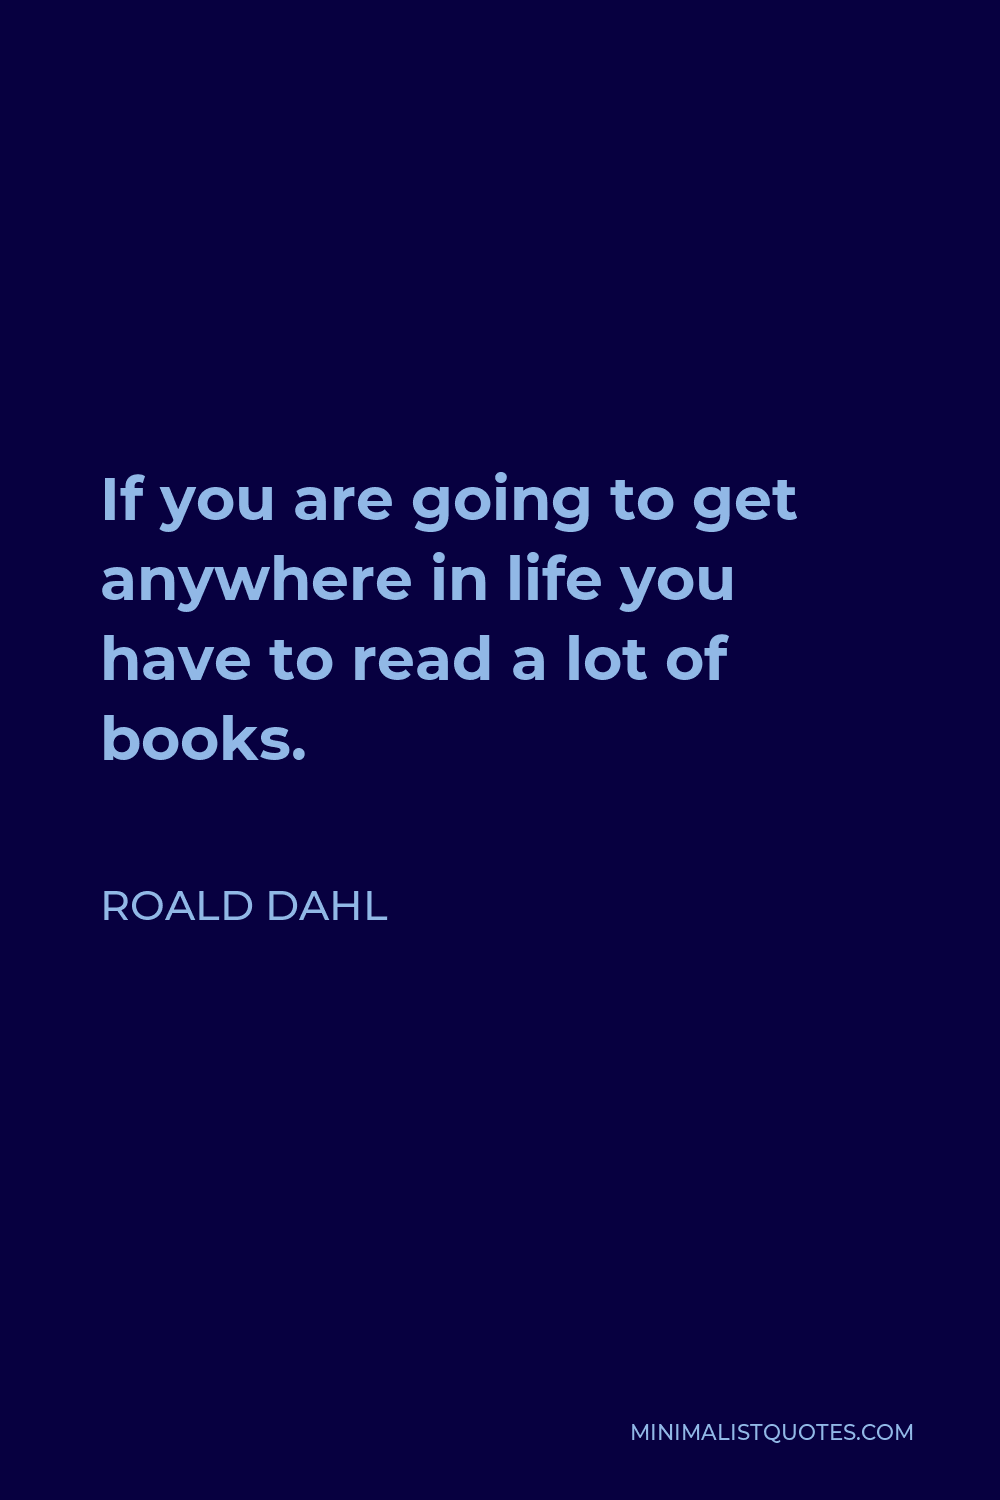 Roald Dahl Quote - If you are going to get anywhere in life you have to read a lot of books.